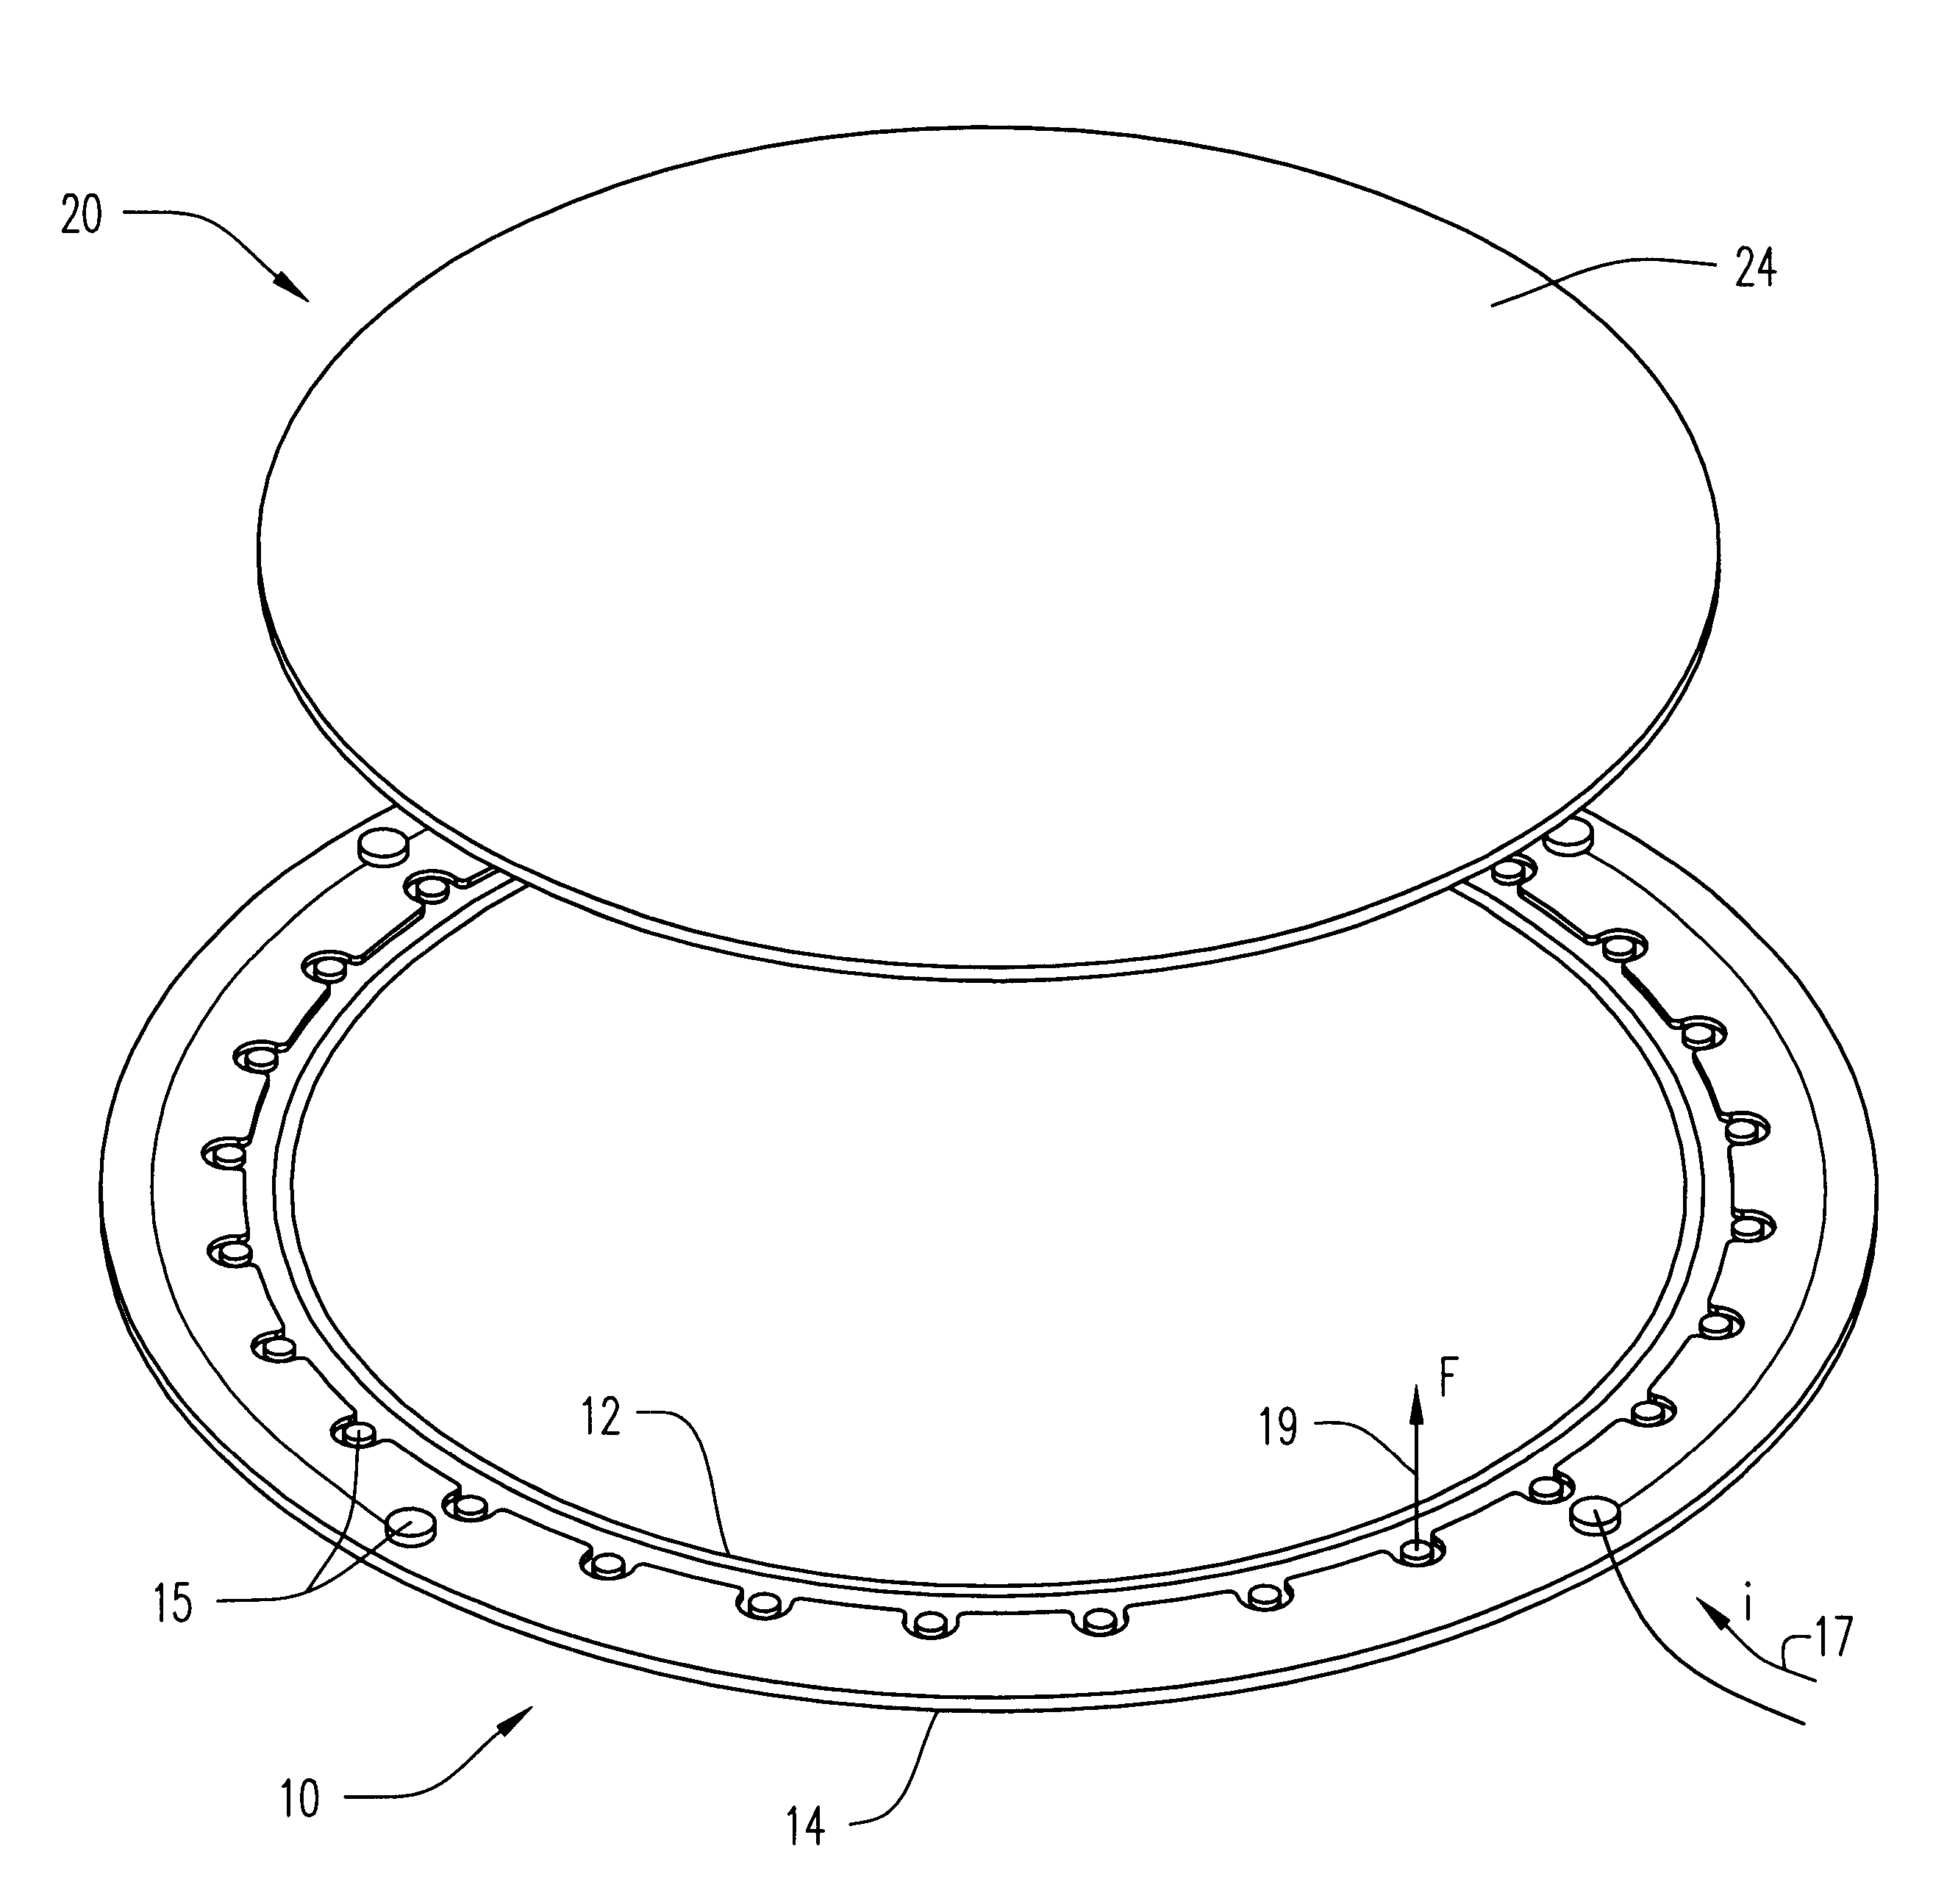 Method of and apparatus for fluid sealing, while electrically contacting, wet-processed workpieces